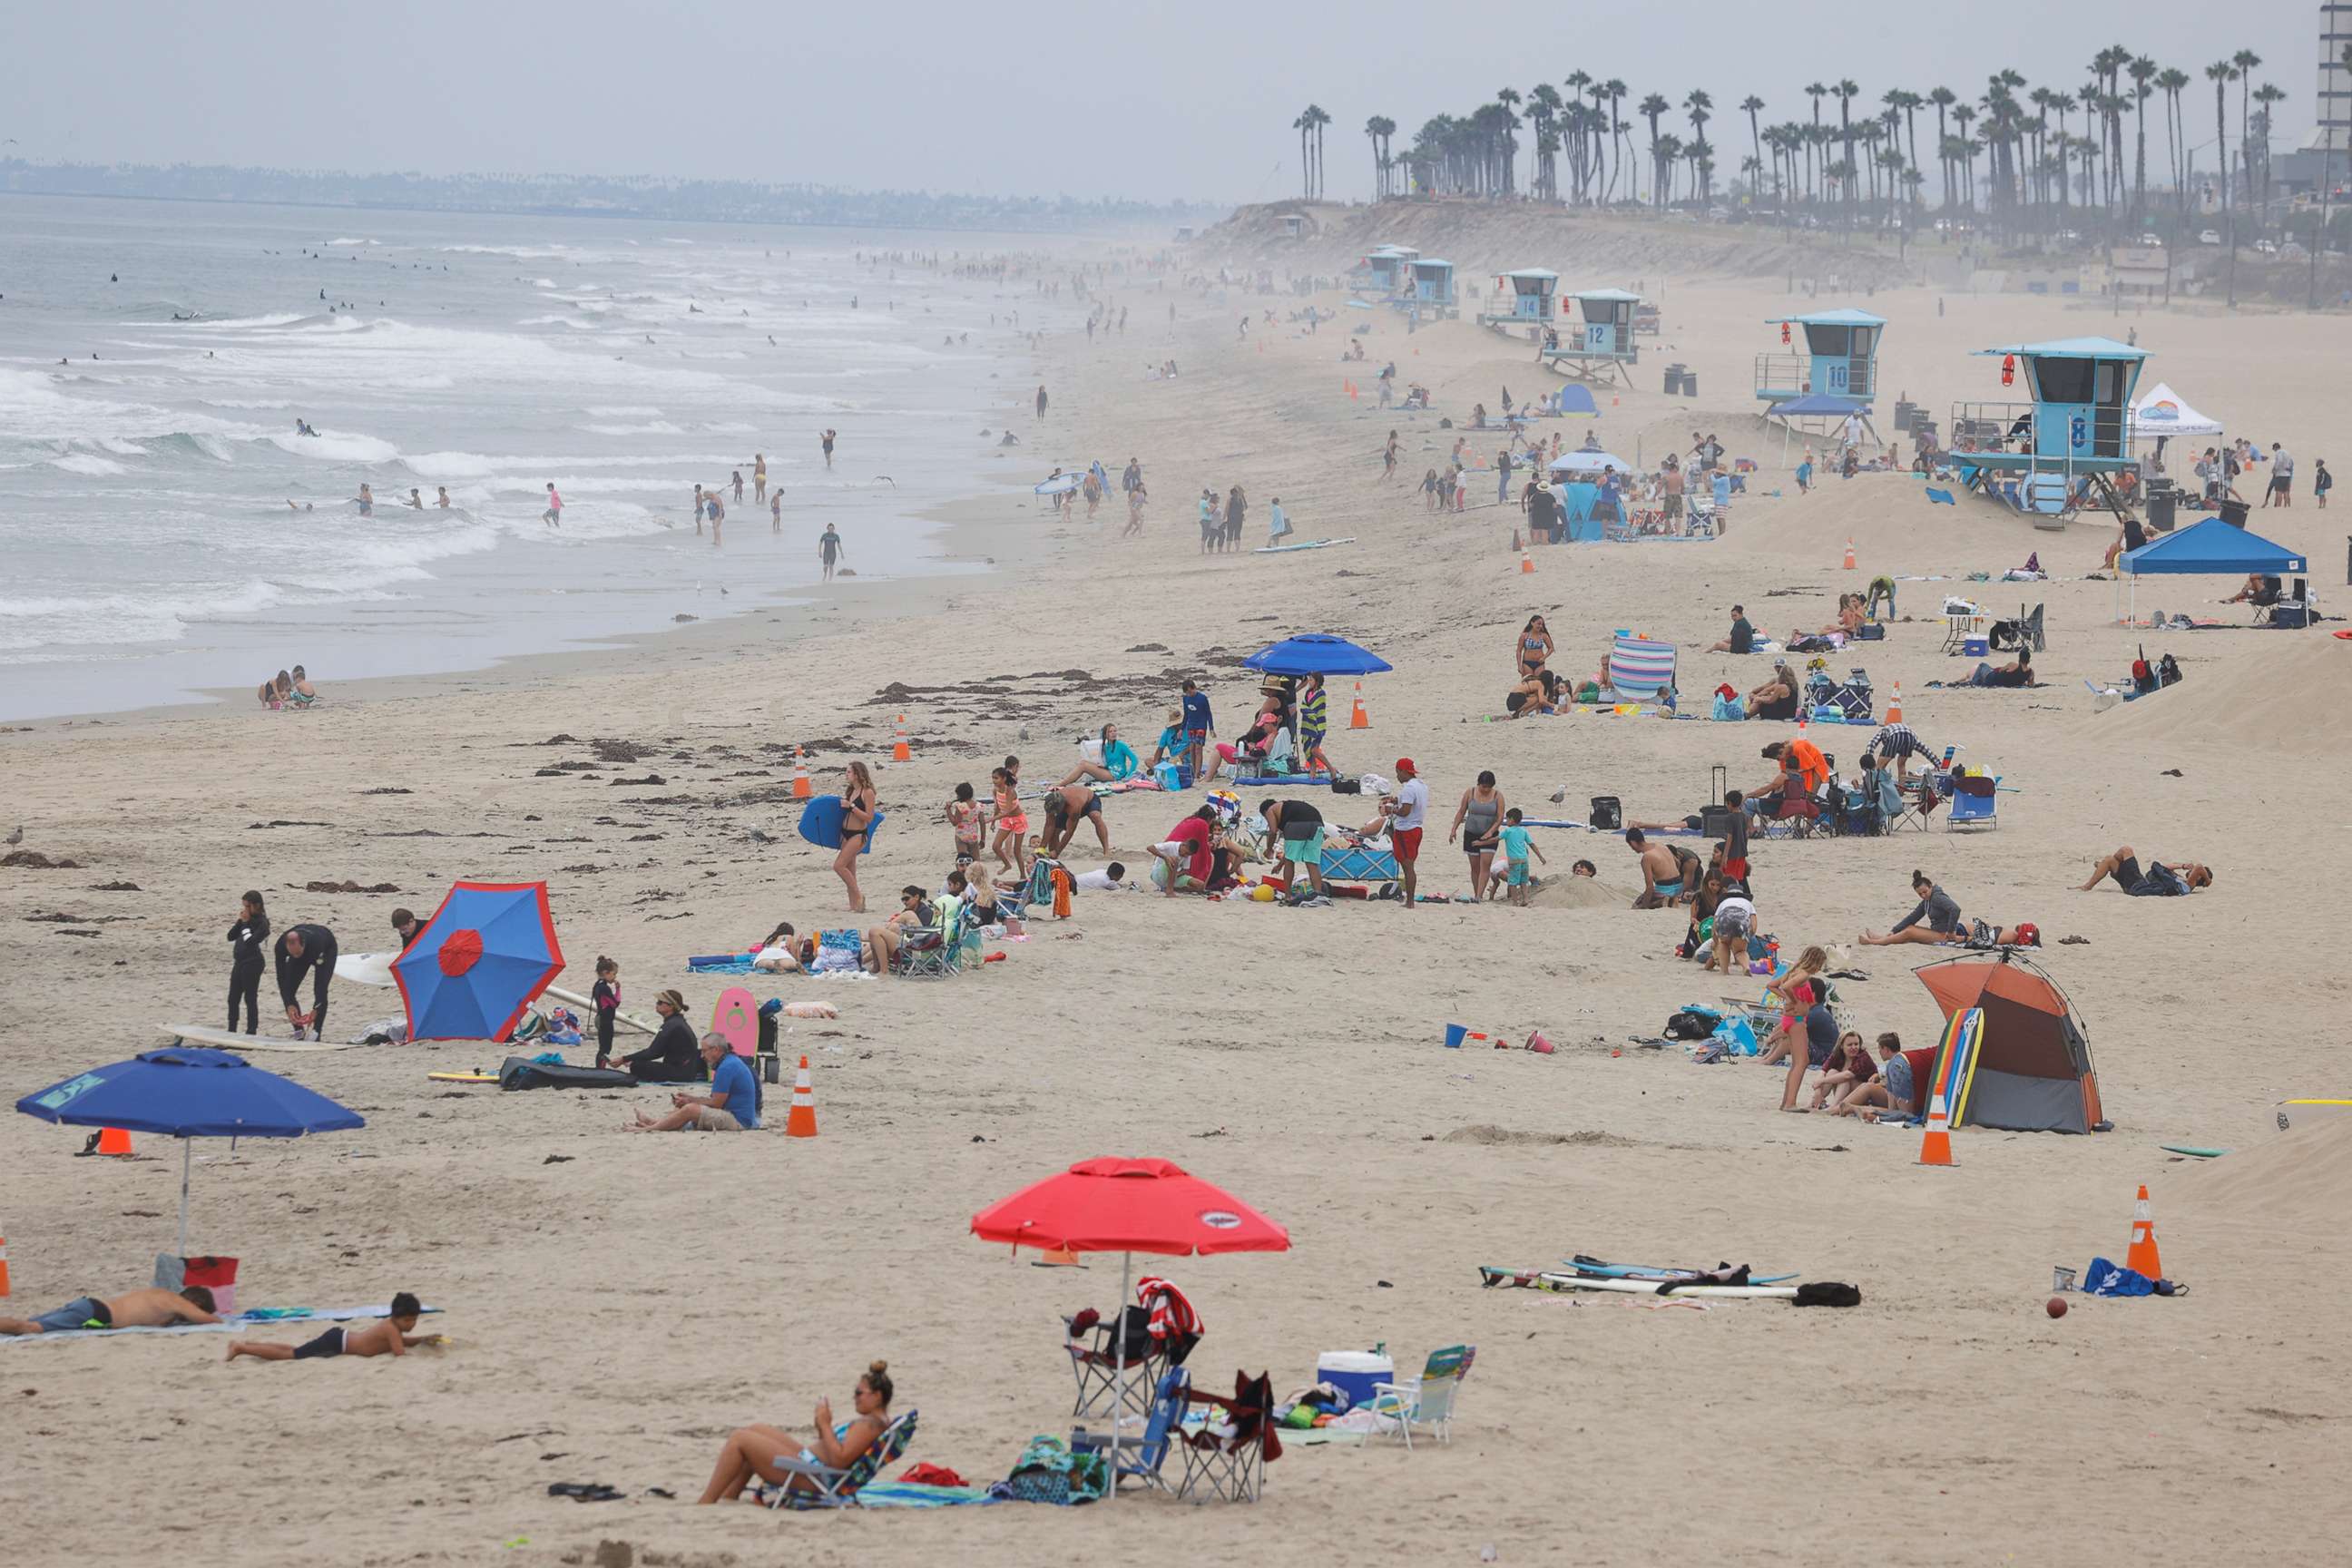 PHOTO: People enjoy the beach during the global outbreak of COVID-19, in Huntington Beach, Calif., July 23, 2020.